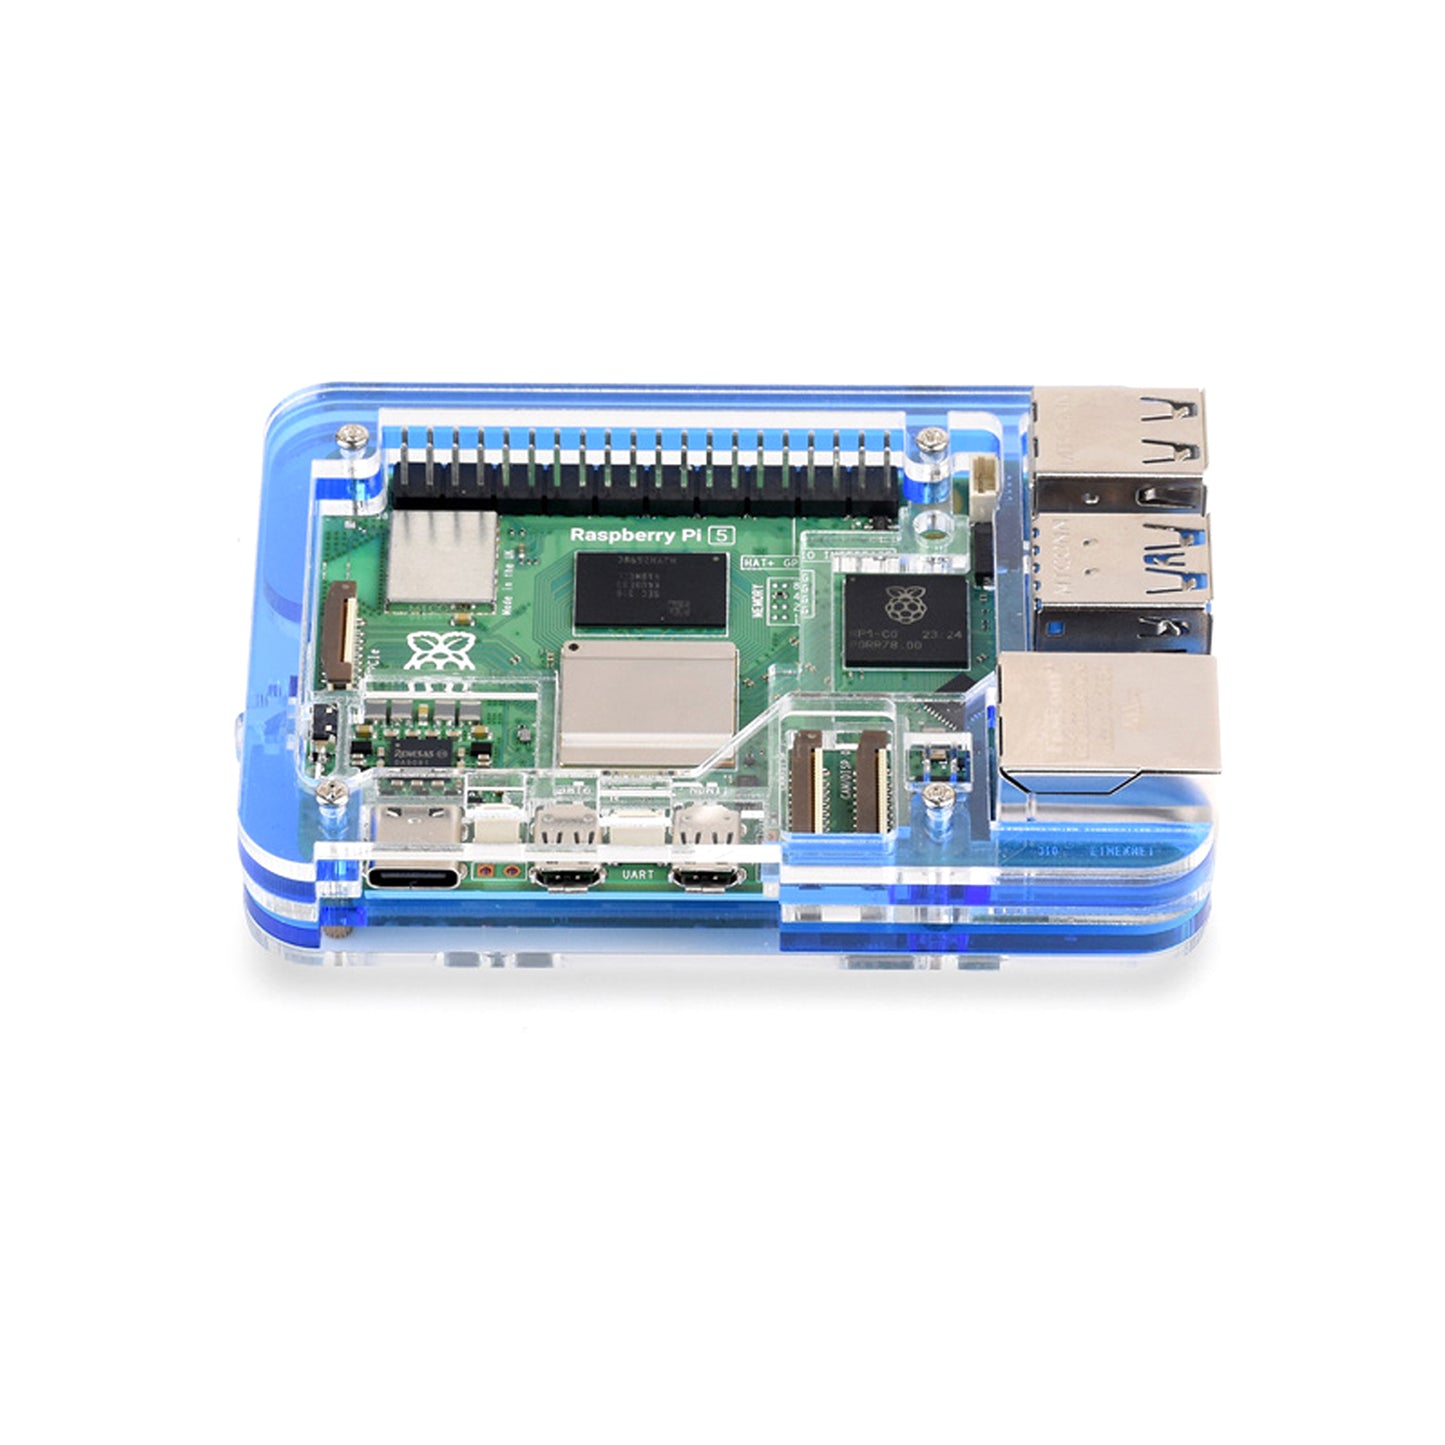 Raspberry Pi 5 5 Layer Case Raspberry Pi 5 Acrylic Shell Compatible with Active Cooler for Raspberry Pi 5 4GB, 8GB - Blue - RS5772 - REES52